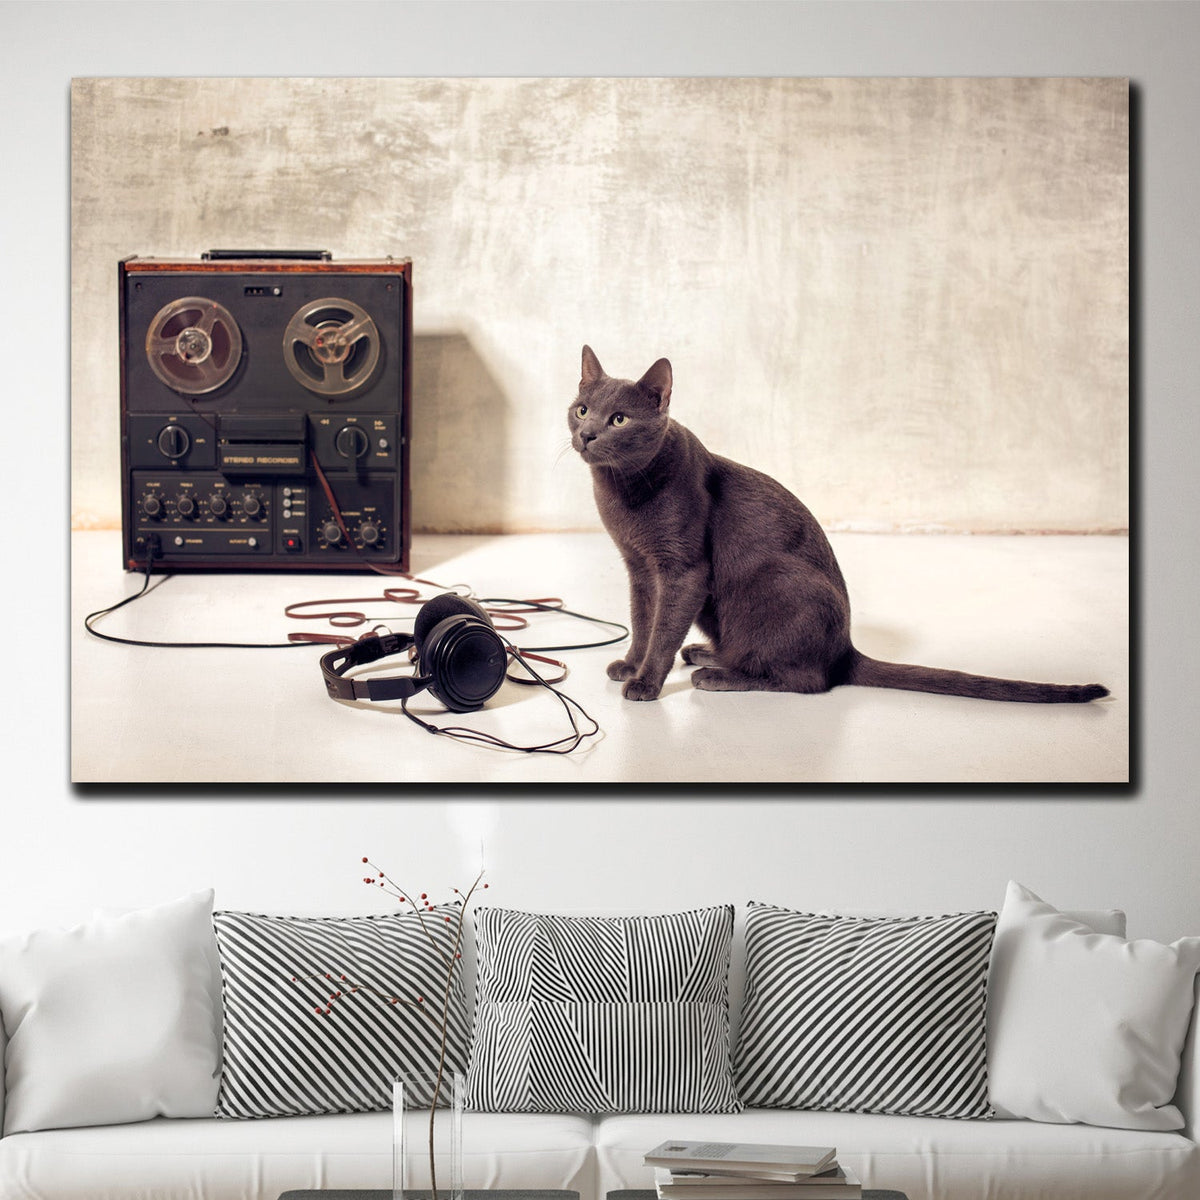 https://cdn.shopify.com/s/files/1/0387/9986/8044/products/HipsterCatandMagnetophonCanvasArtprintStretched-3.jpg